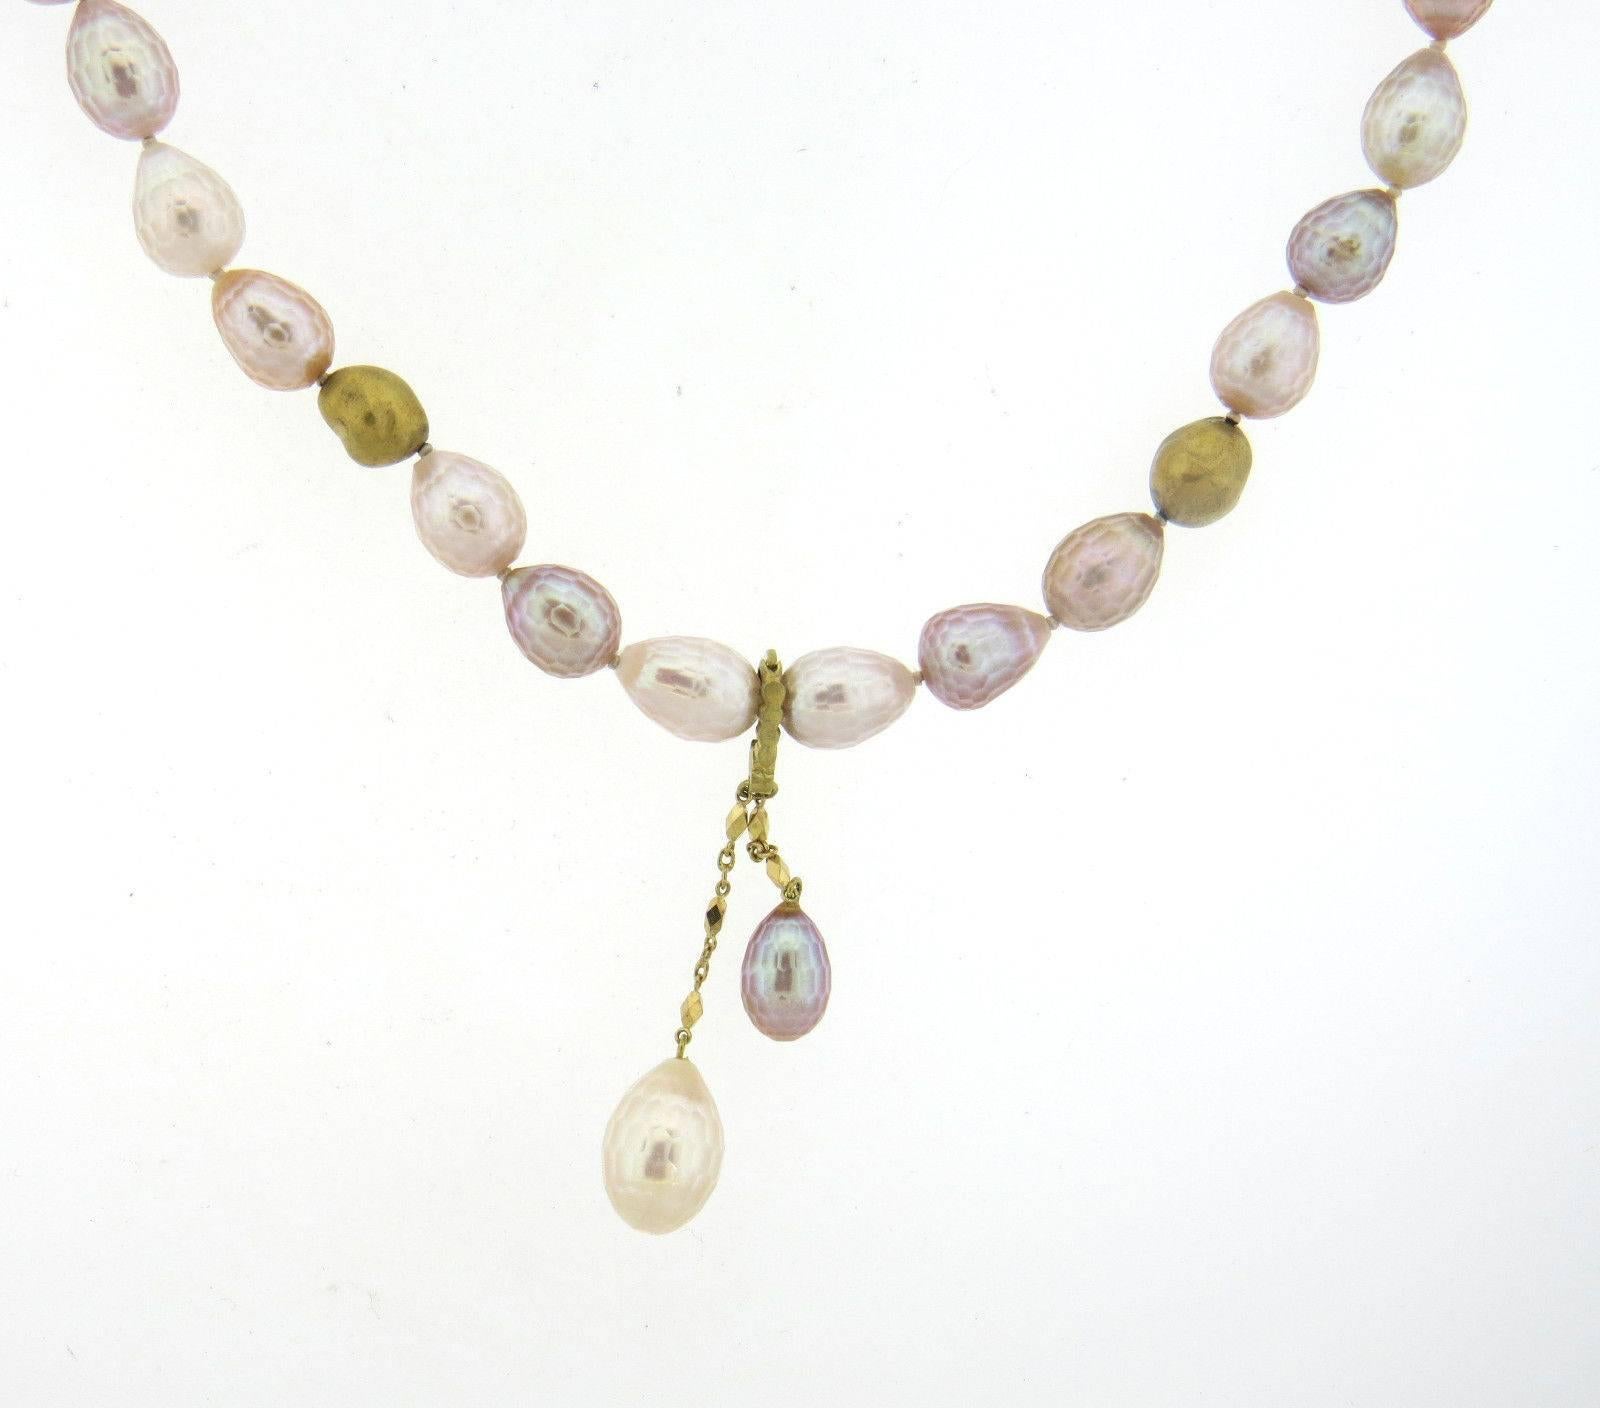 An 18k yellow gold necklace set with faceted pearls - approx. 7.5mm x 12mm to 10mm x 15.5mm.  Crafted by Robin Rotenier, the necklace measures 15 3/4